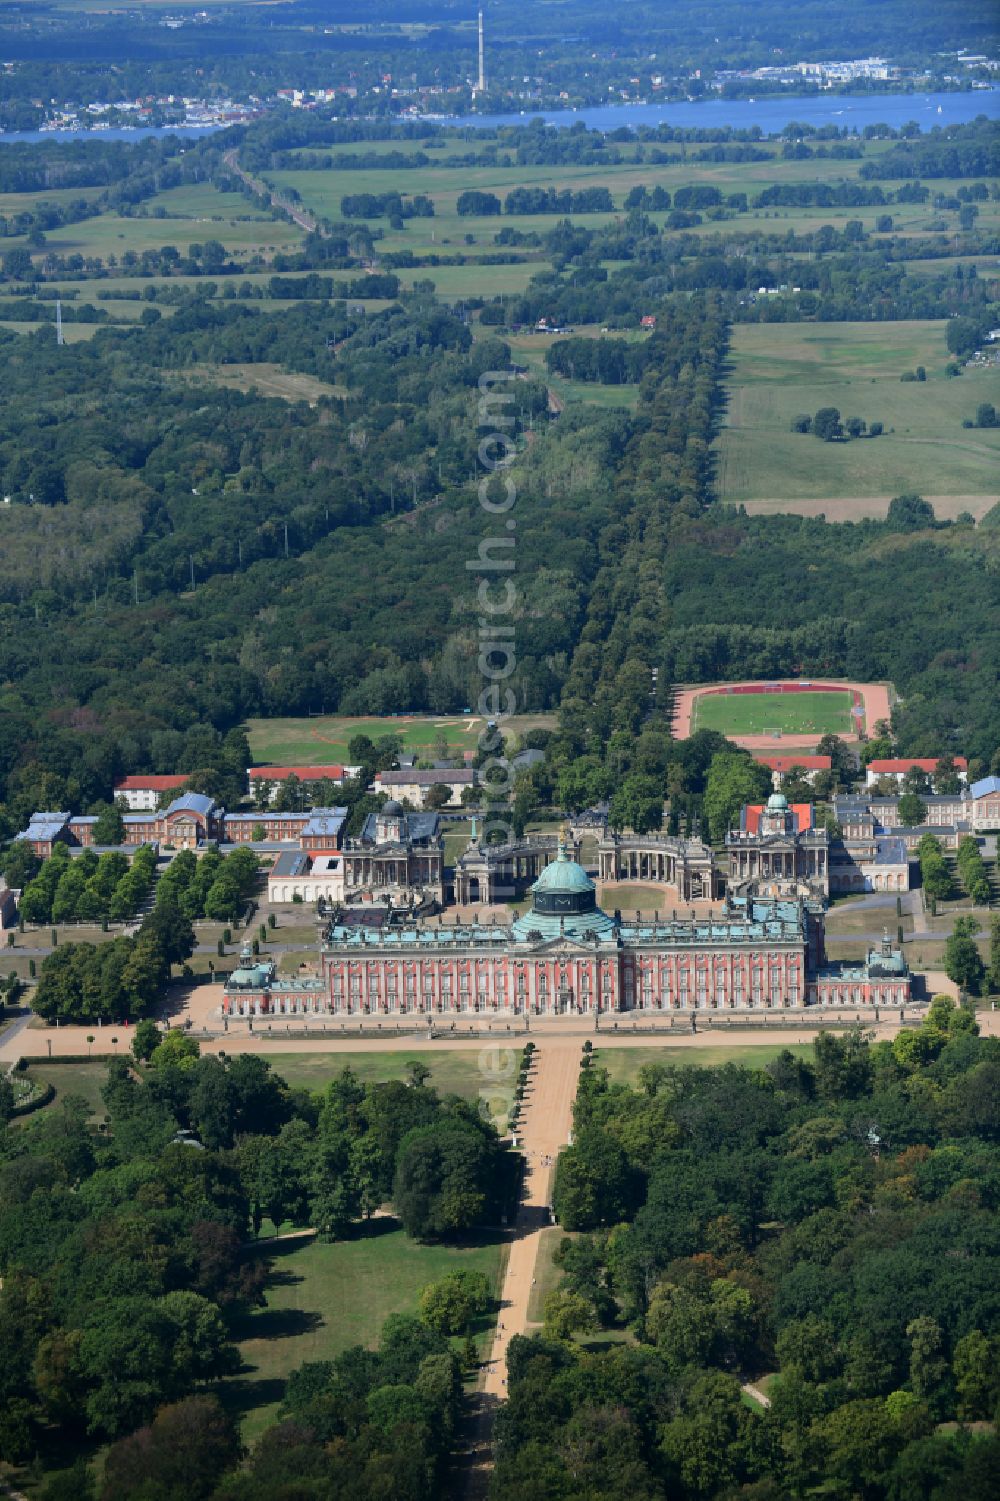 Potsdam from the bird's eye view: Palace - Neues Palais in the district Westliche Vorstadt in Potsdam in the state Brandenburg, Germany